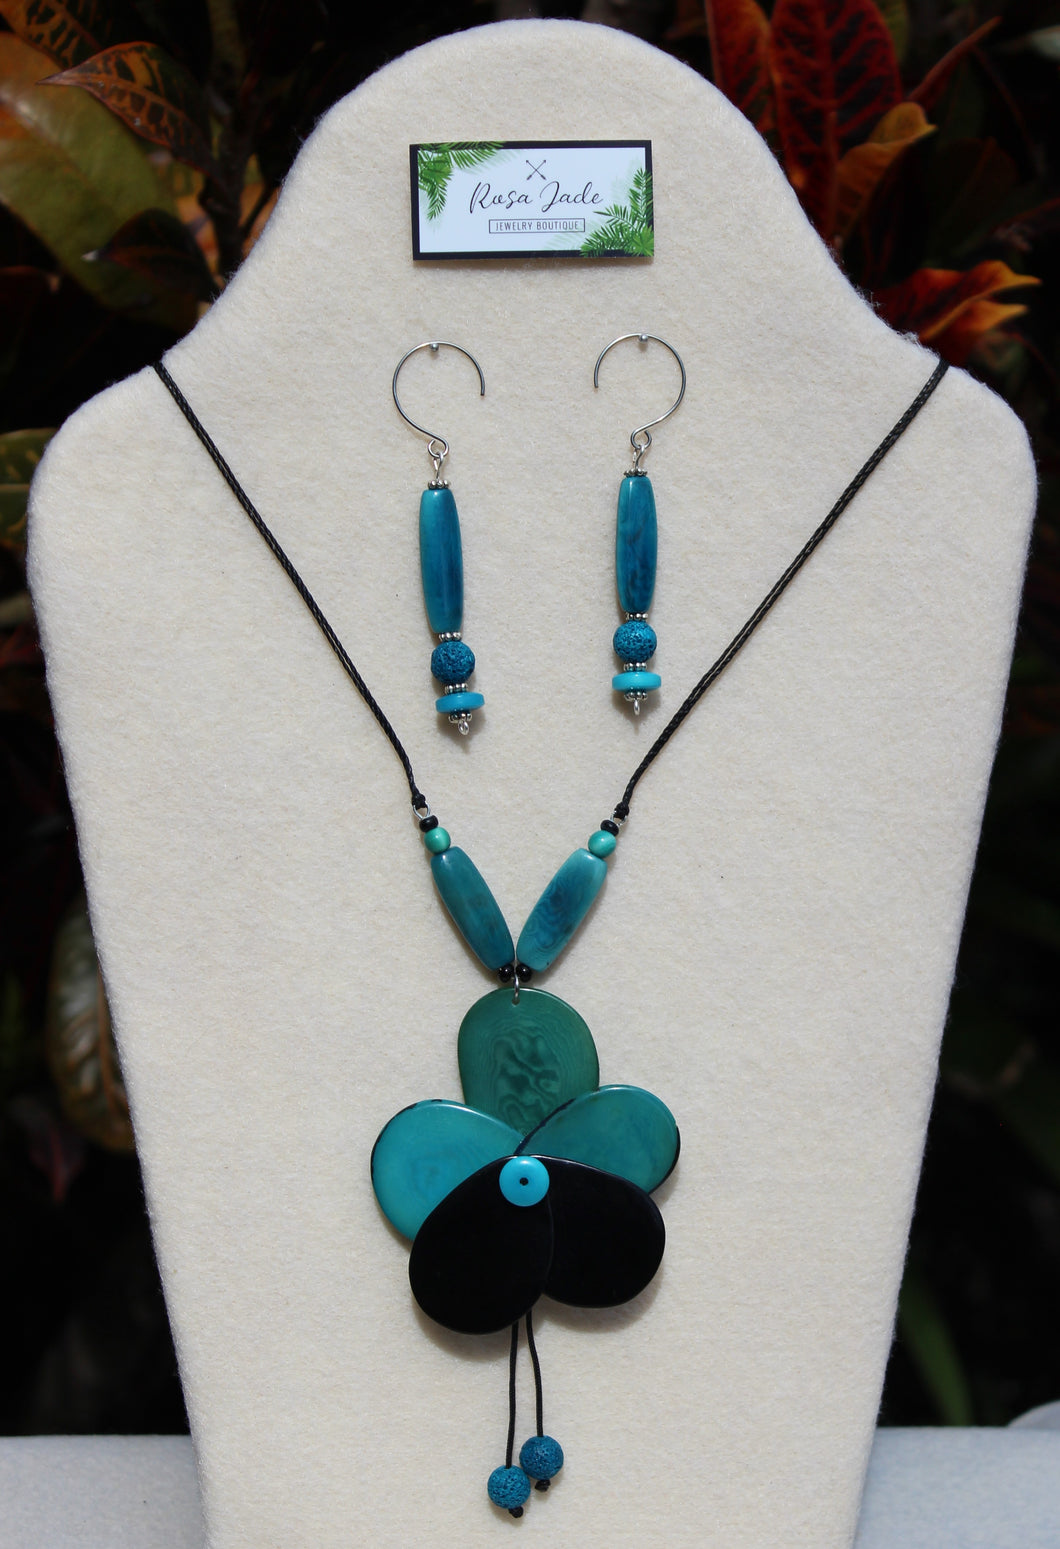 Turquoise and Black Tagua Nut Rose with Earrings Set